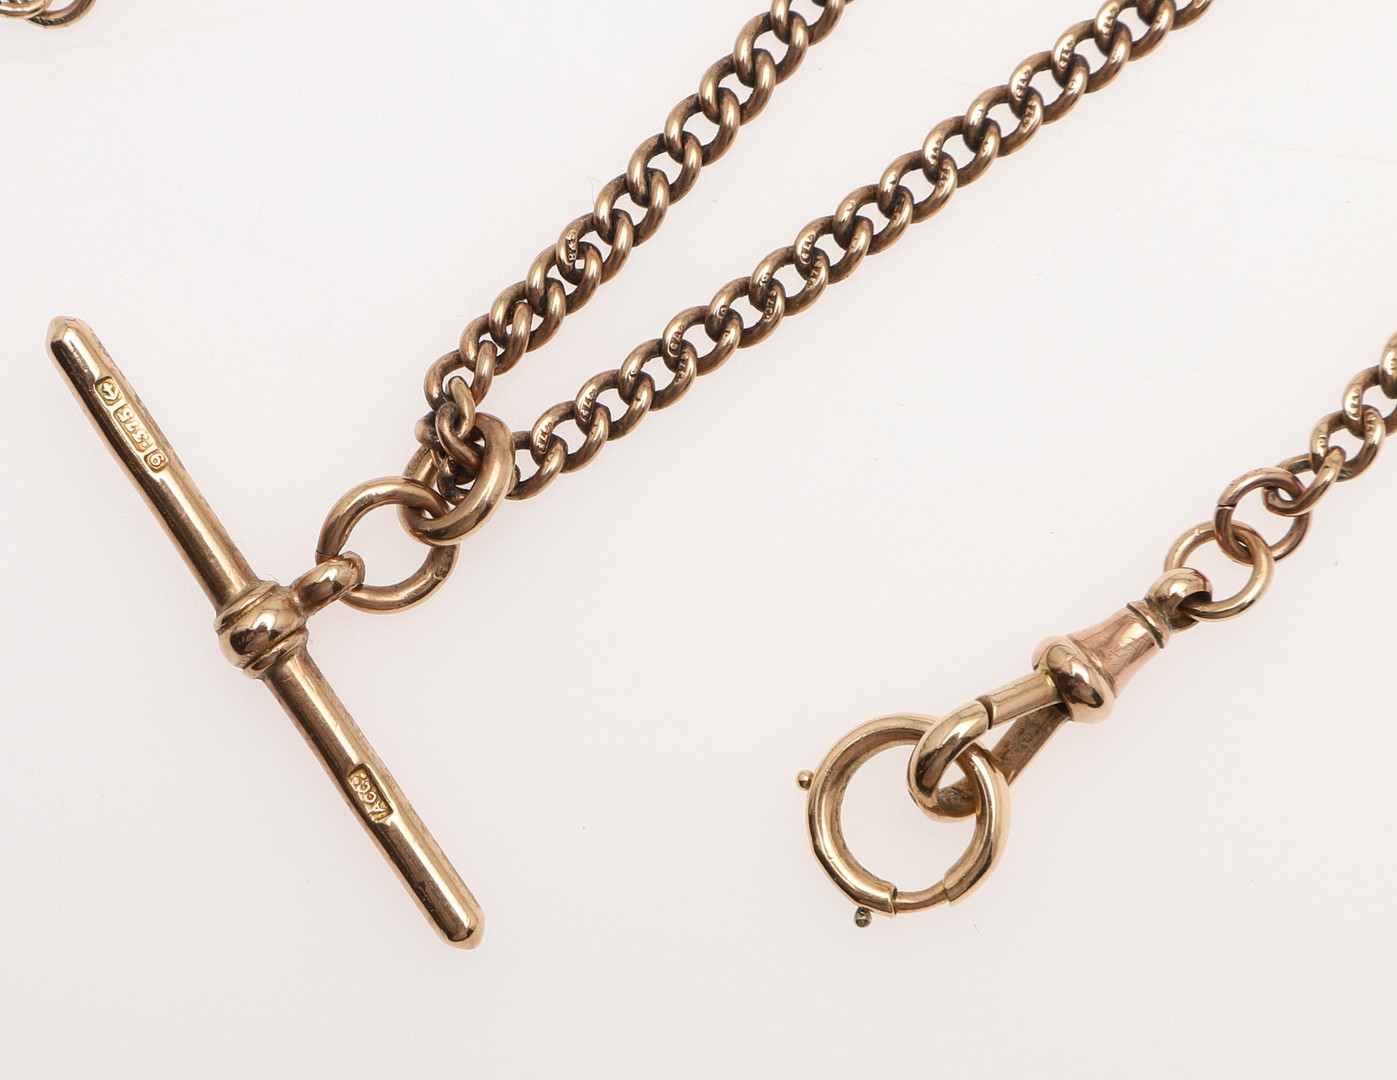 A 9CT GOLD CURB LINK WATCH CHAIN. - Image 2 of 2